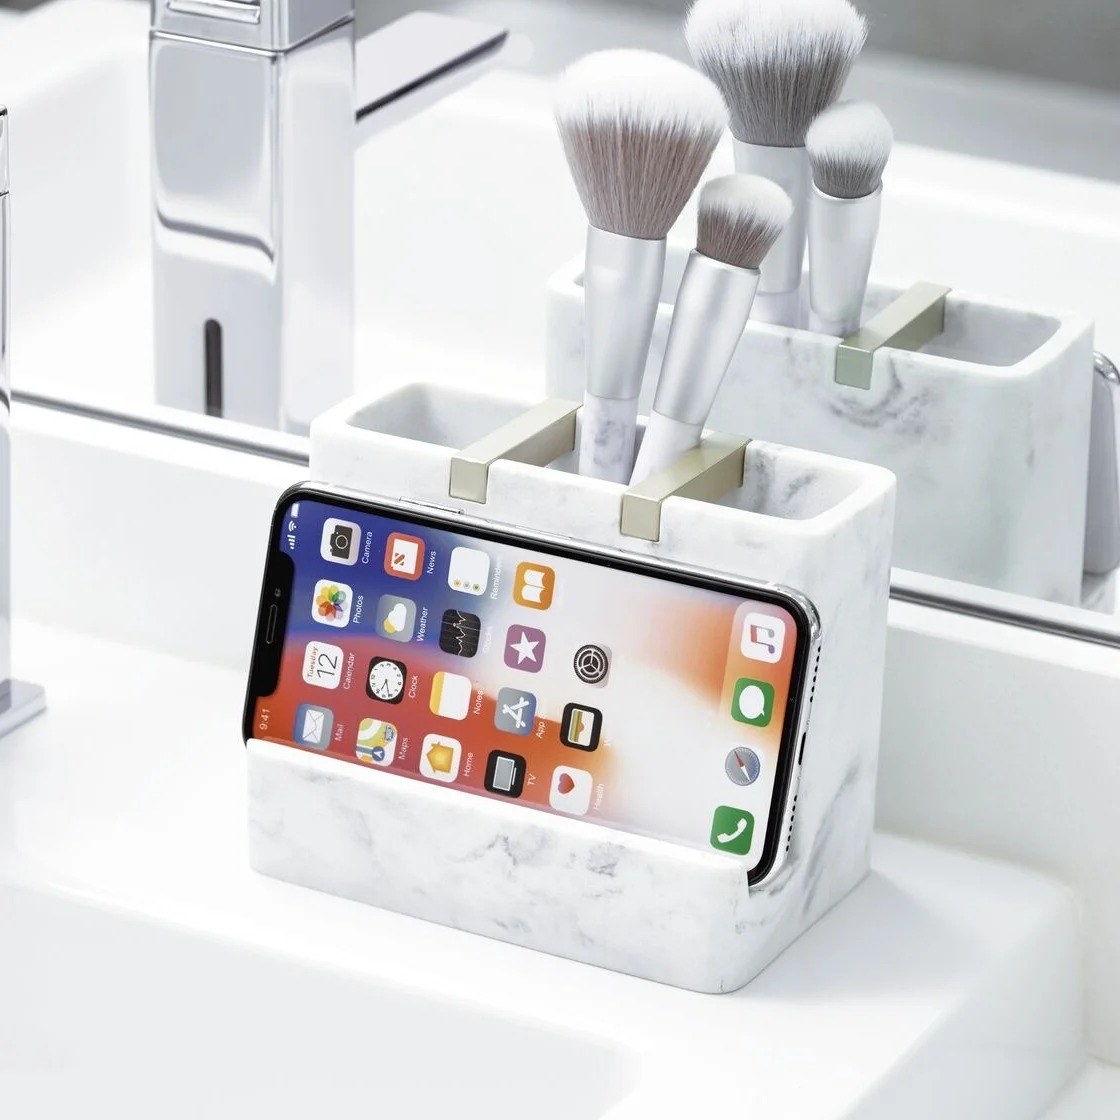 The organizer with three compartments and a phone stand holding a phone on the ledge of a sink